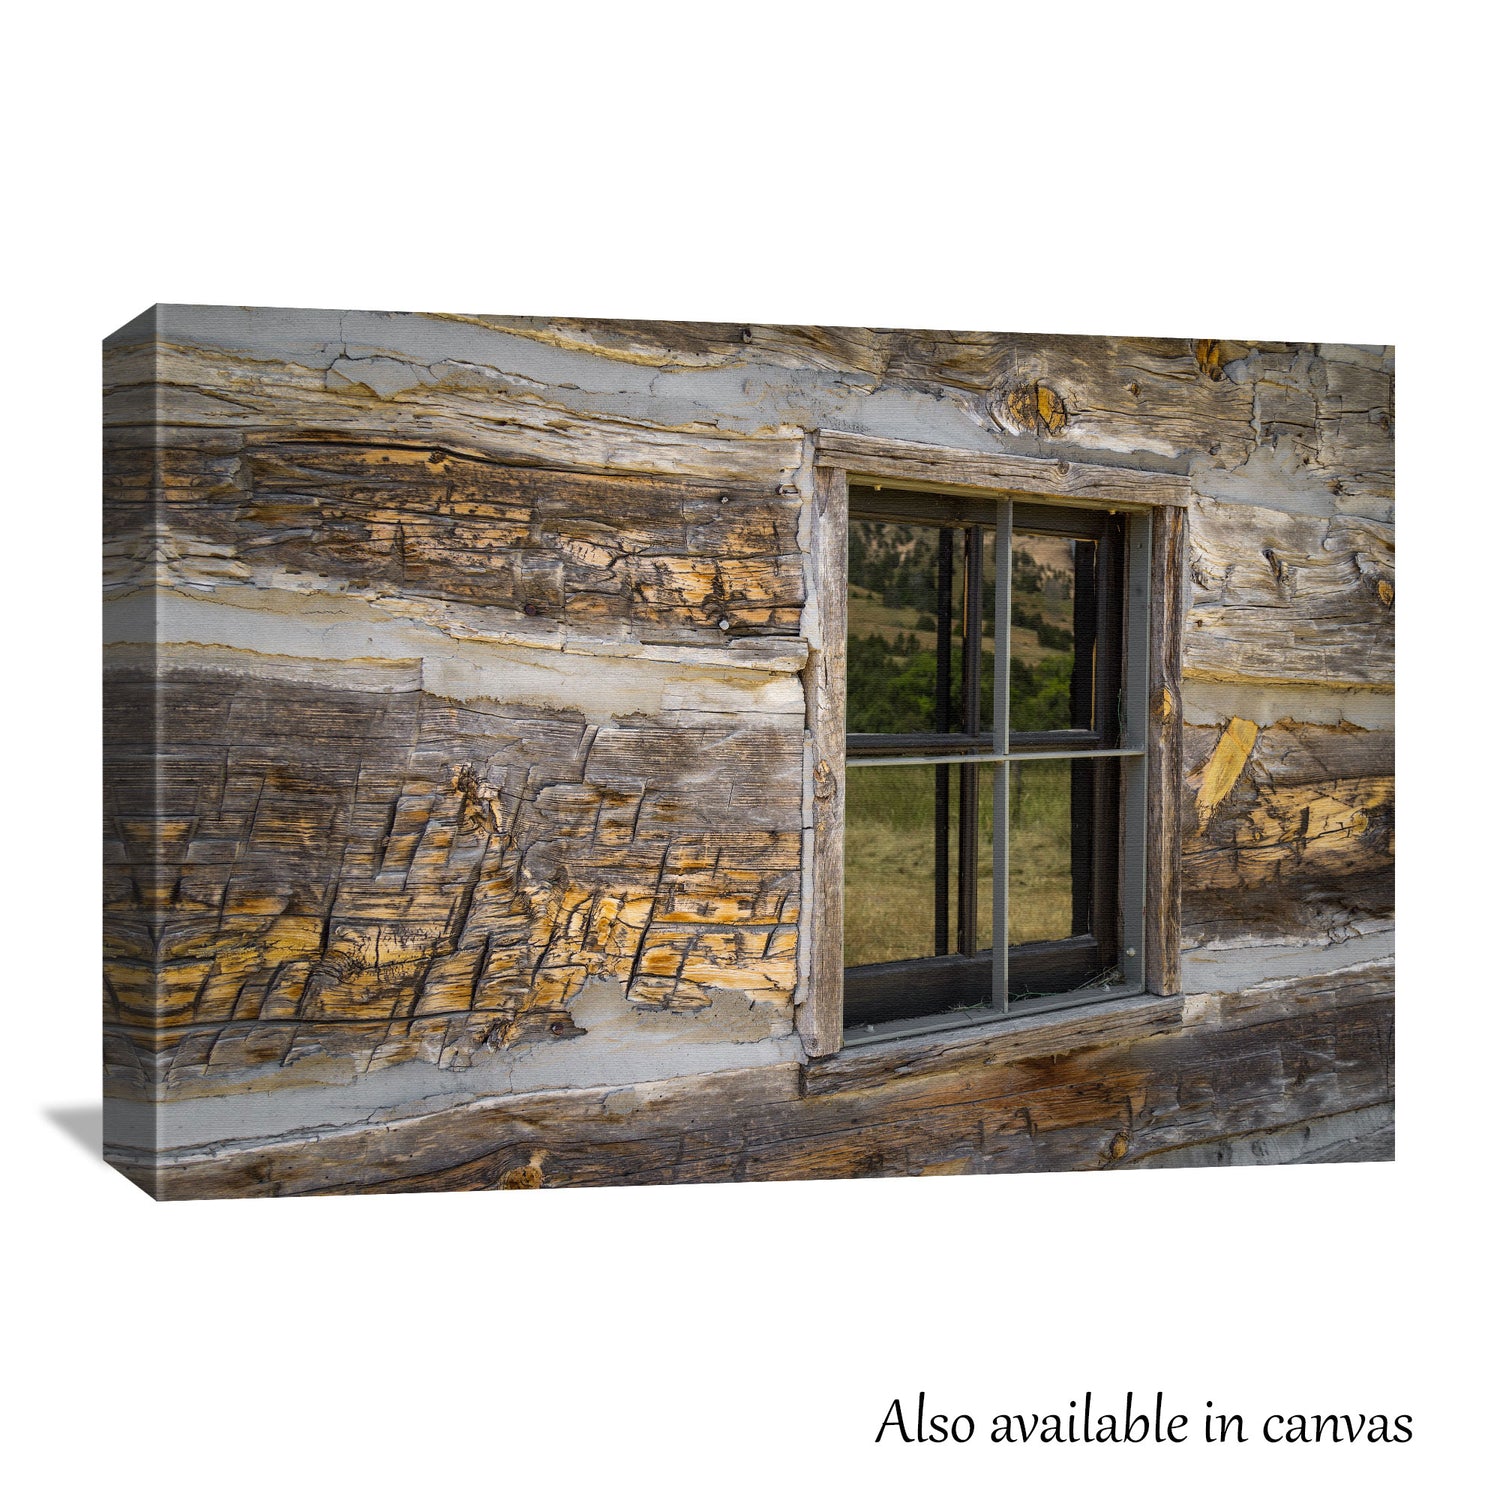 The old cabin window photograph is beautifully presented on a gallery-wrapped canvas, showing this photograph is also available as a canvas print for those interested in a ready-to-hang solution.